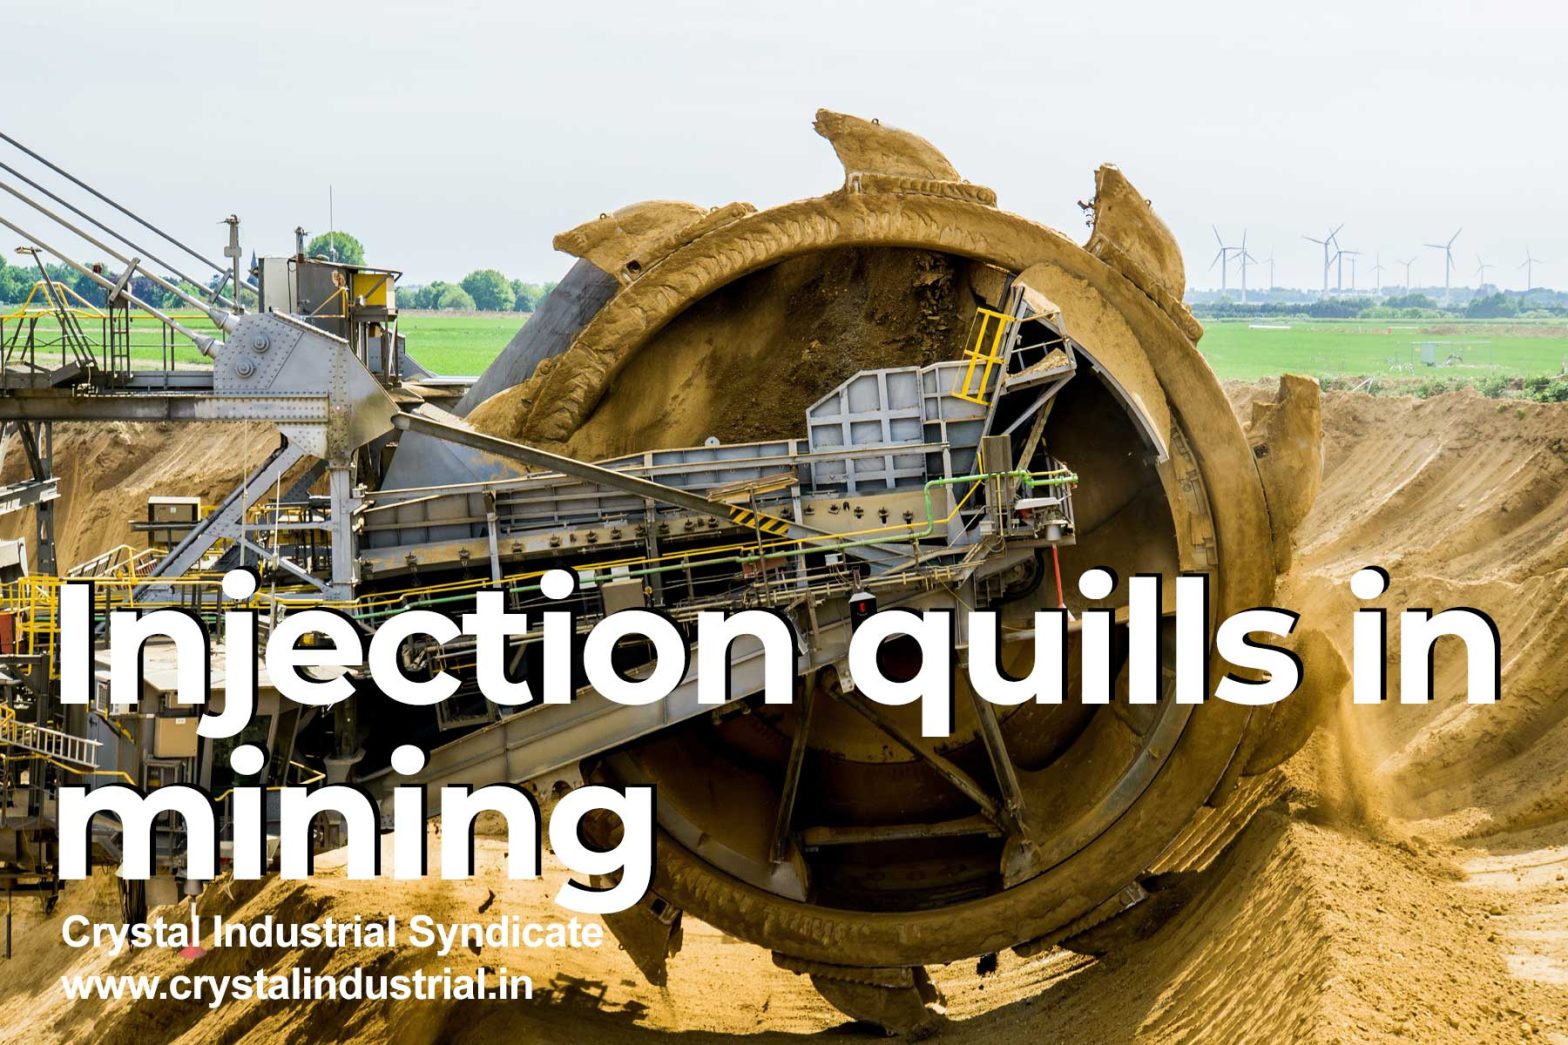 Benefits of Injection quills for the mining industry